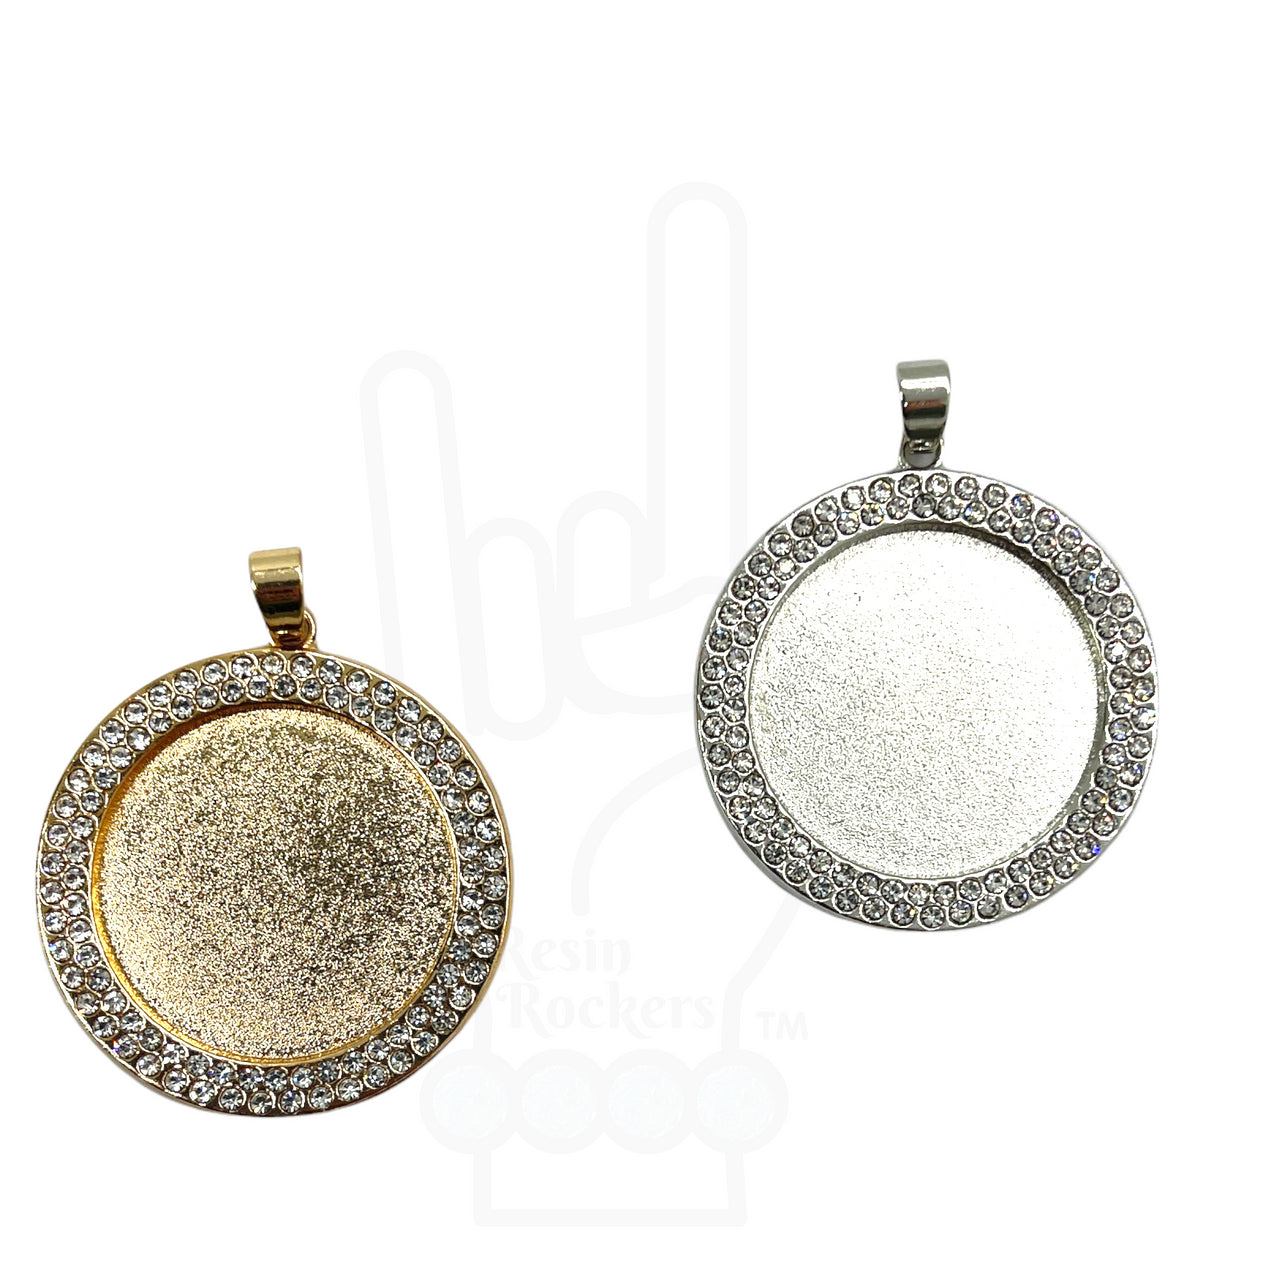 25mm Round Bezel with Rhinestones & Pinch Clips Pendant Blank for UV or Epoxy Resin